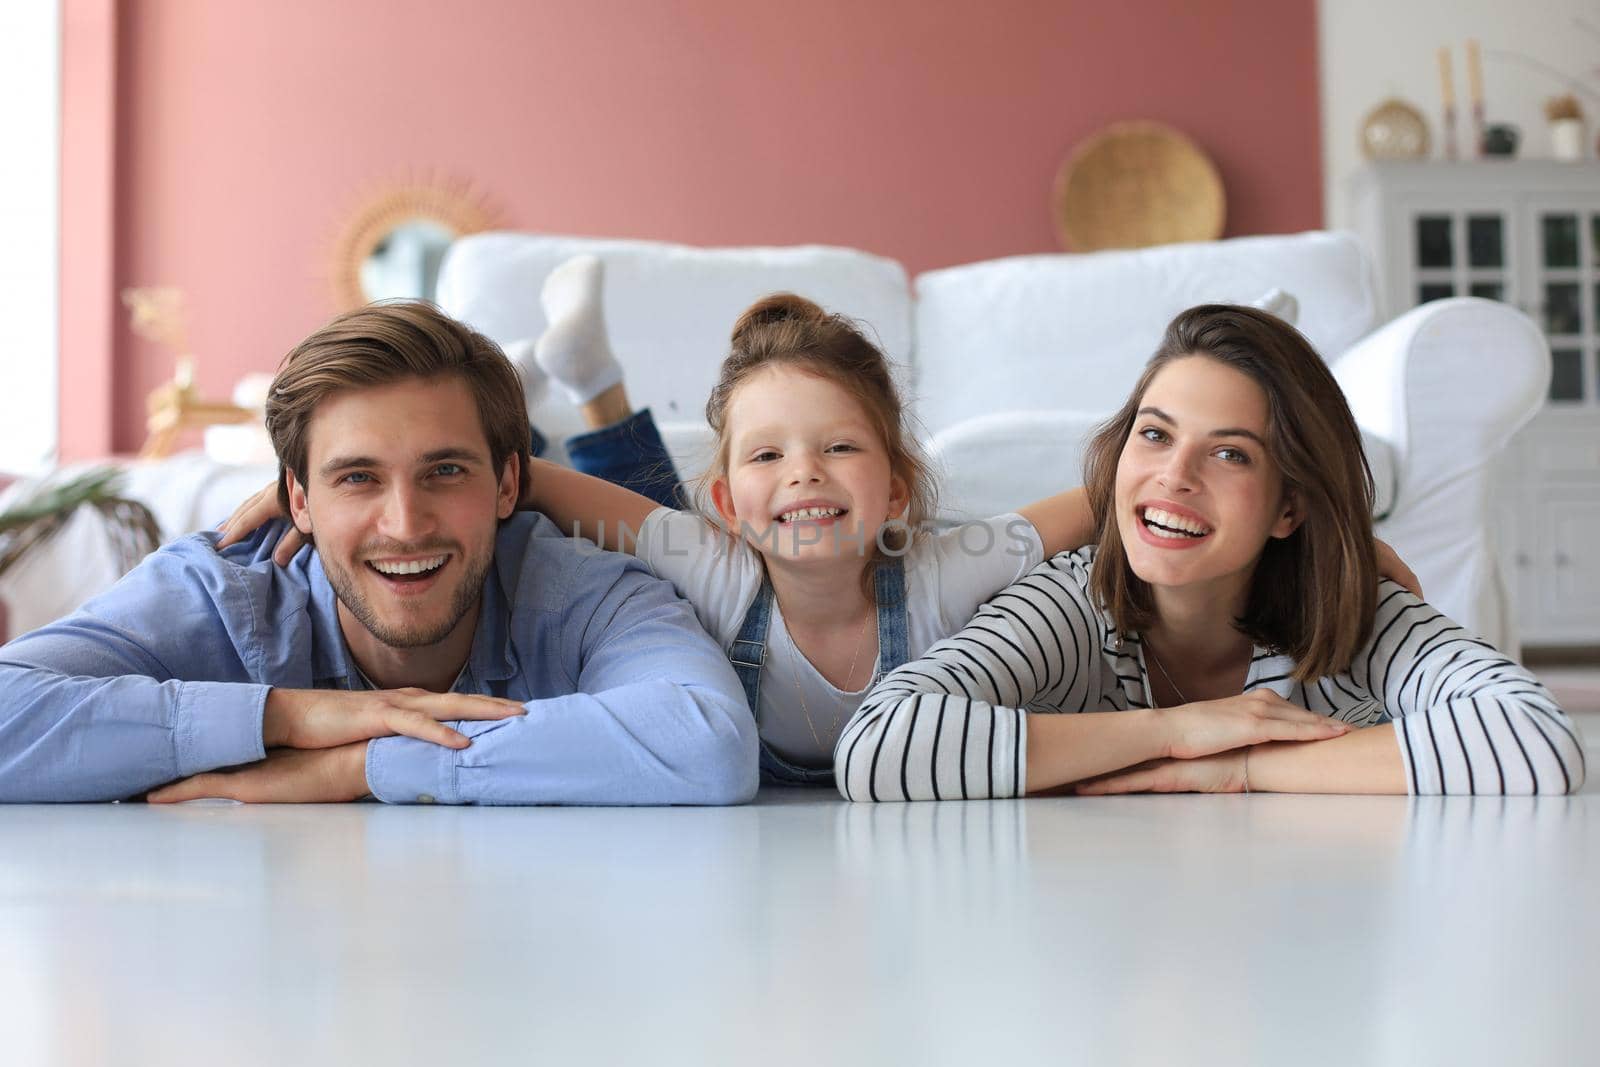 Young Caucasian family with small daughter pose relax on floor in living room, smiling little girl kid hug embrace parents, show love and gratitude, rest at home together